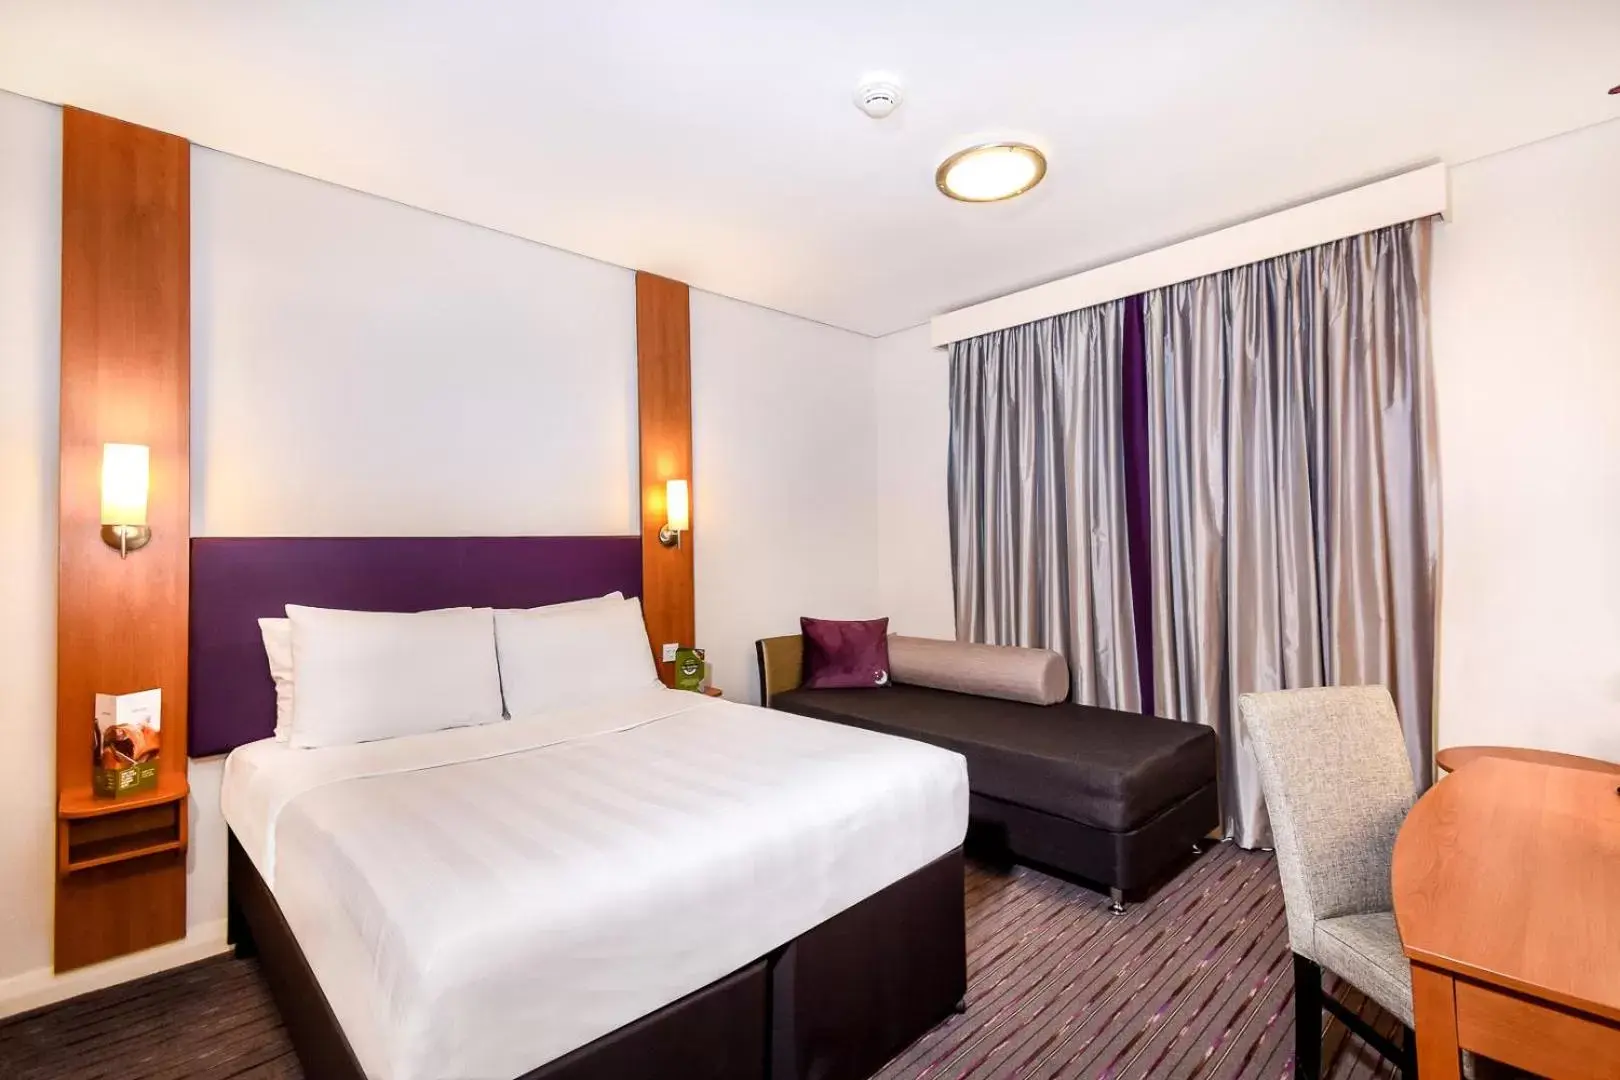 Double Room - Free DXB Airport Shuttle Every 30 mins to T3 & T1 in Premier Inn Dubai International Airport